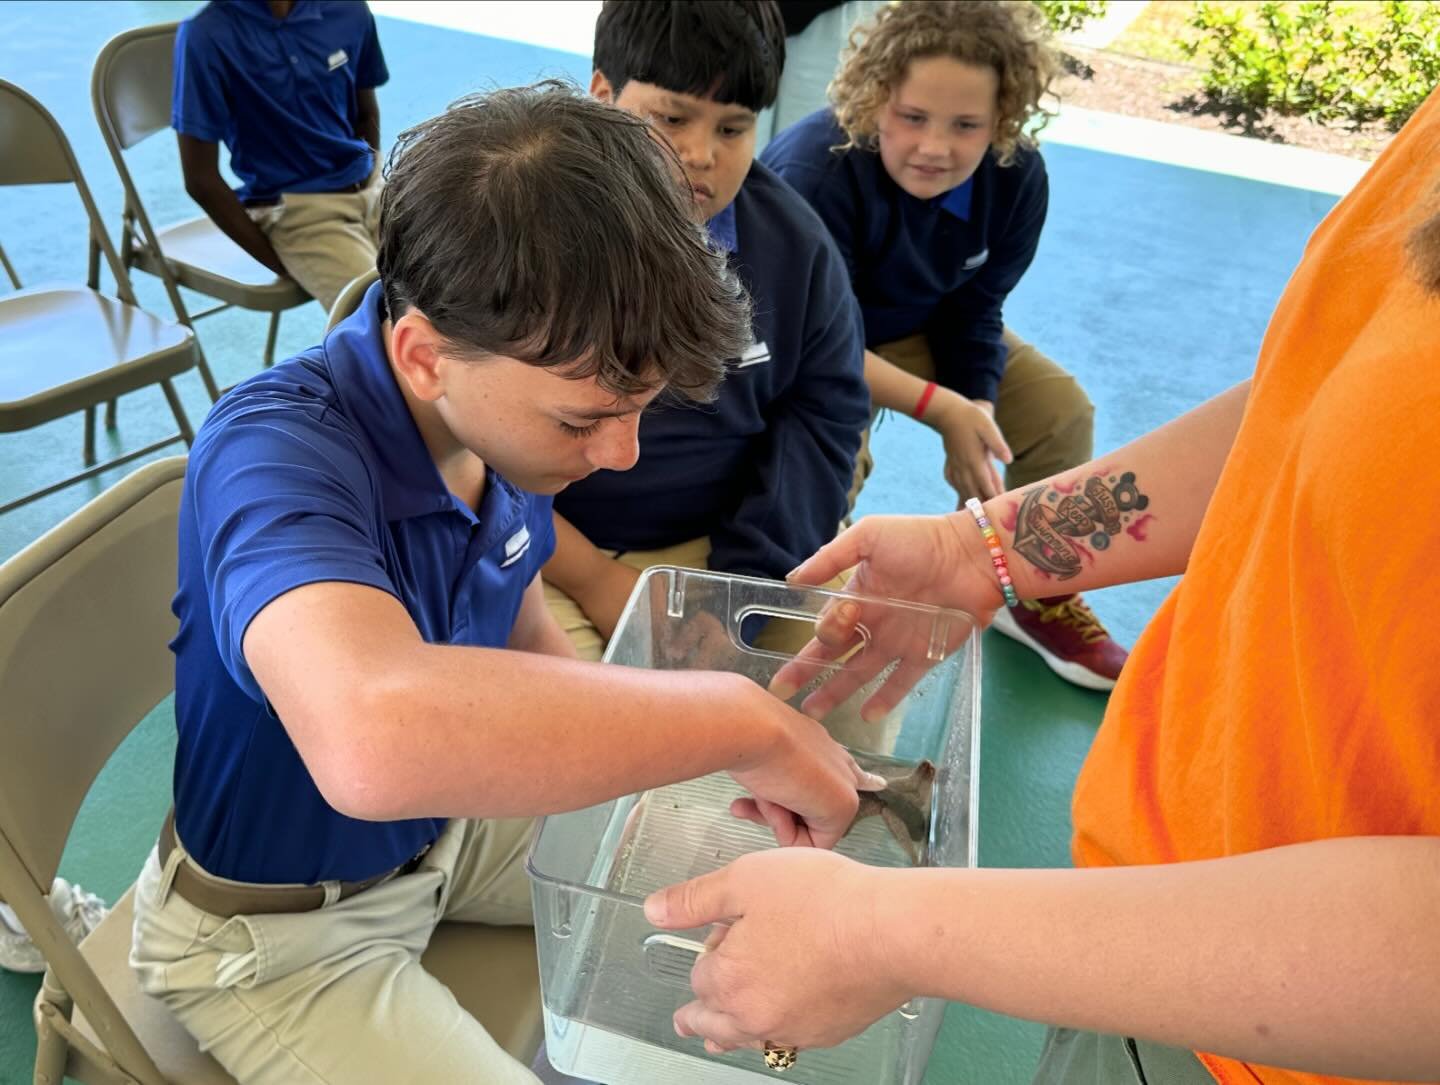 We had a blast teaming up with the Chi Chi Rodriguez Academy to dive deep into marine science! 🌊💙 In February, their awesome students joined us at the Discovery Center for an unforgettable eco-vessel adventure, a tour of our exhibit gallery, and ev